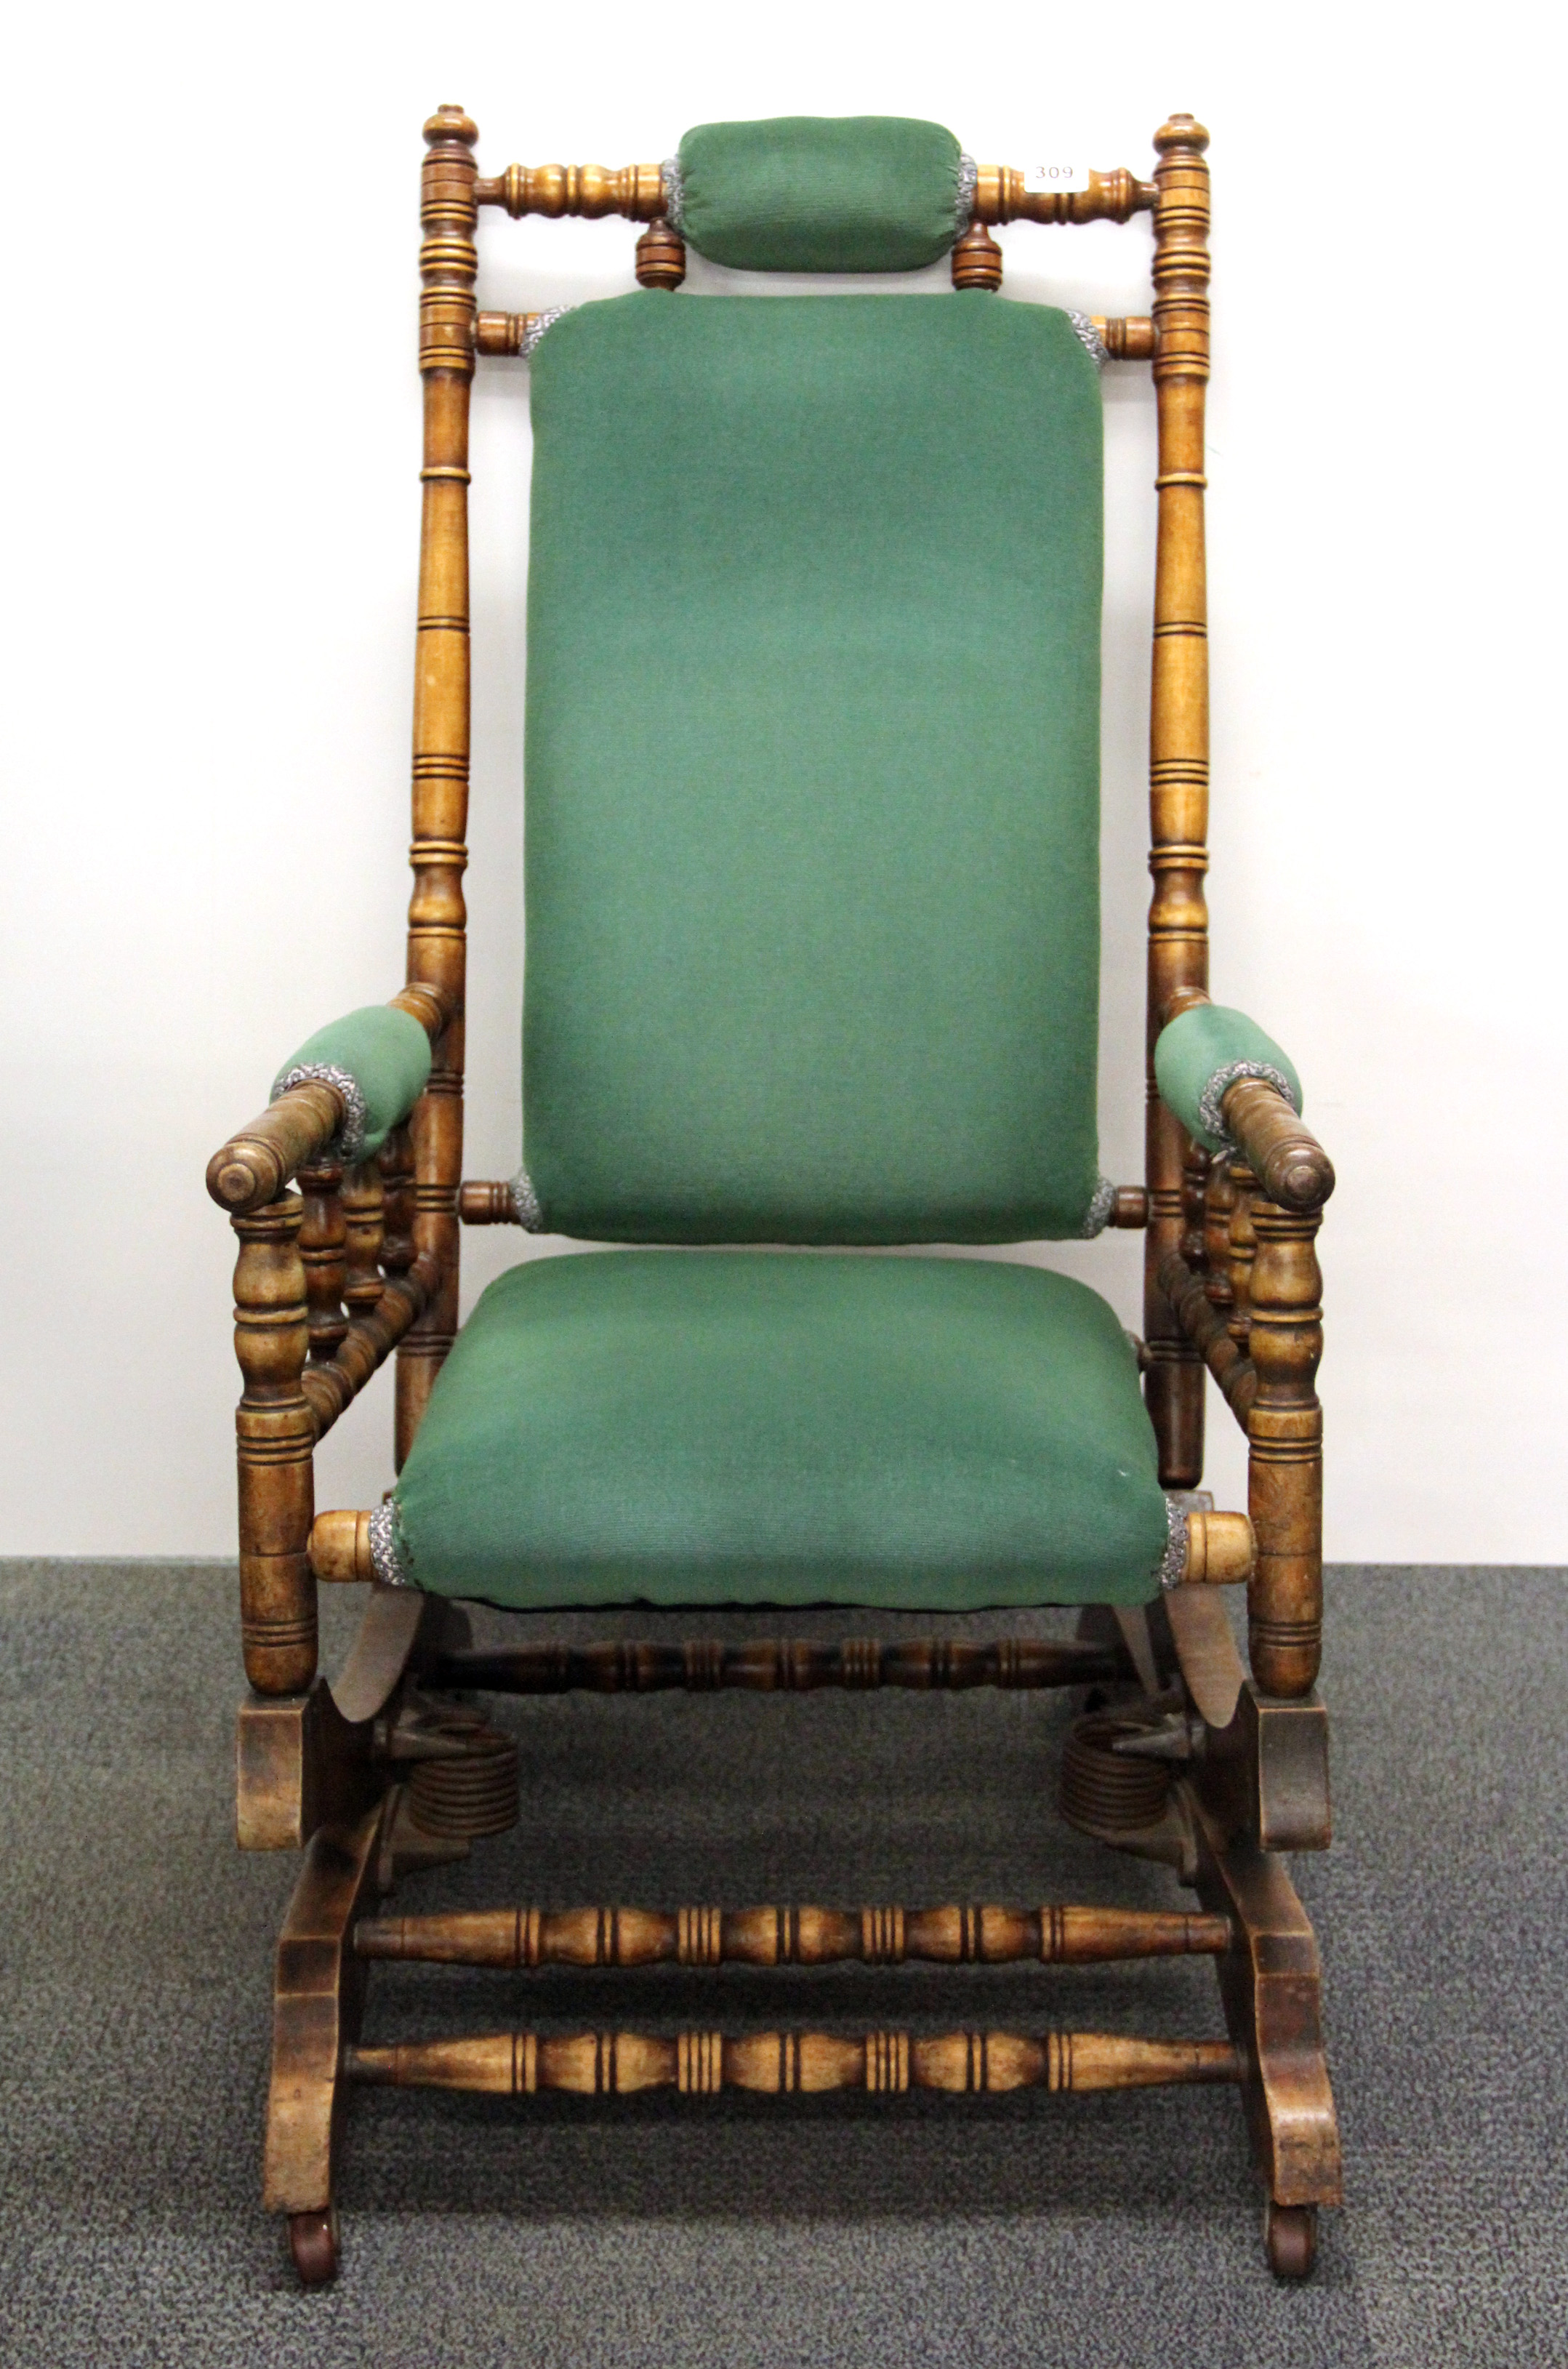 A 19th century American style rocking chair.